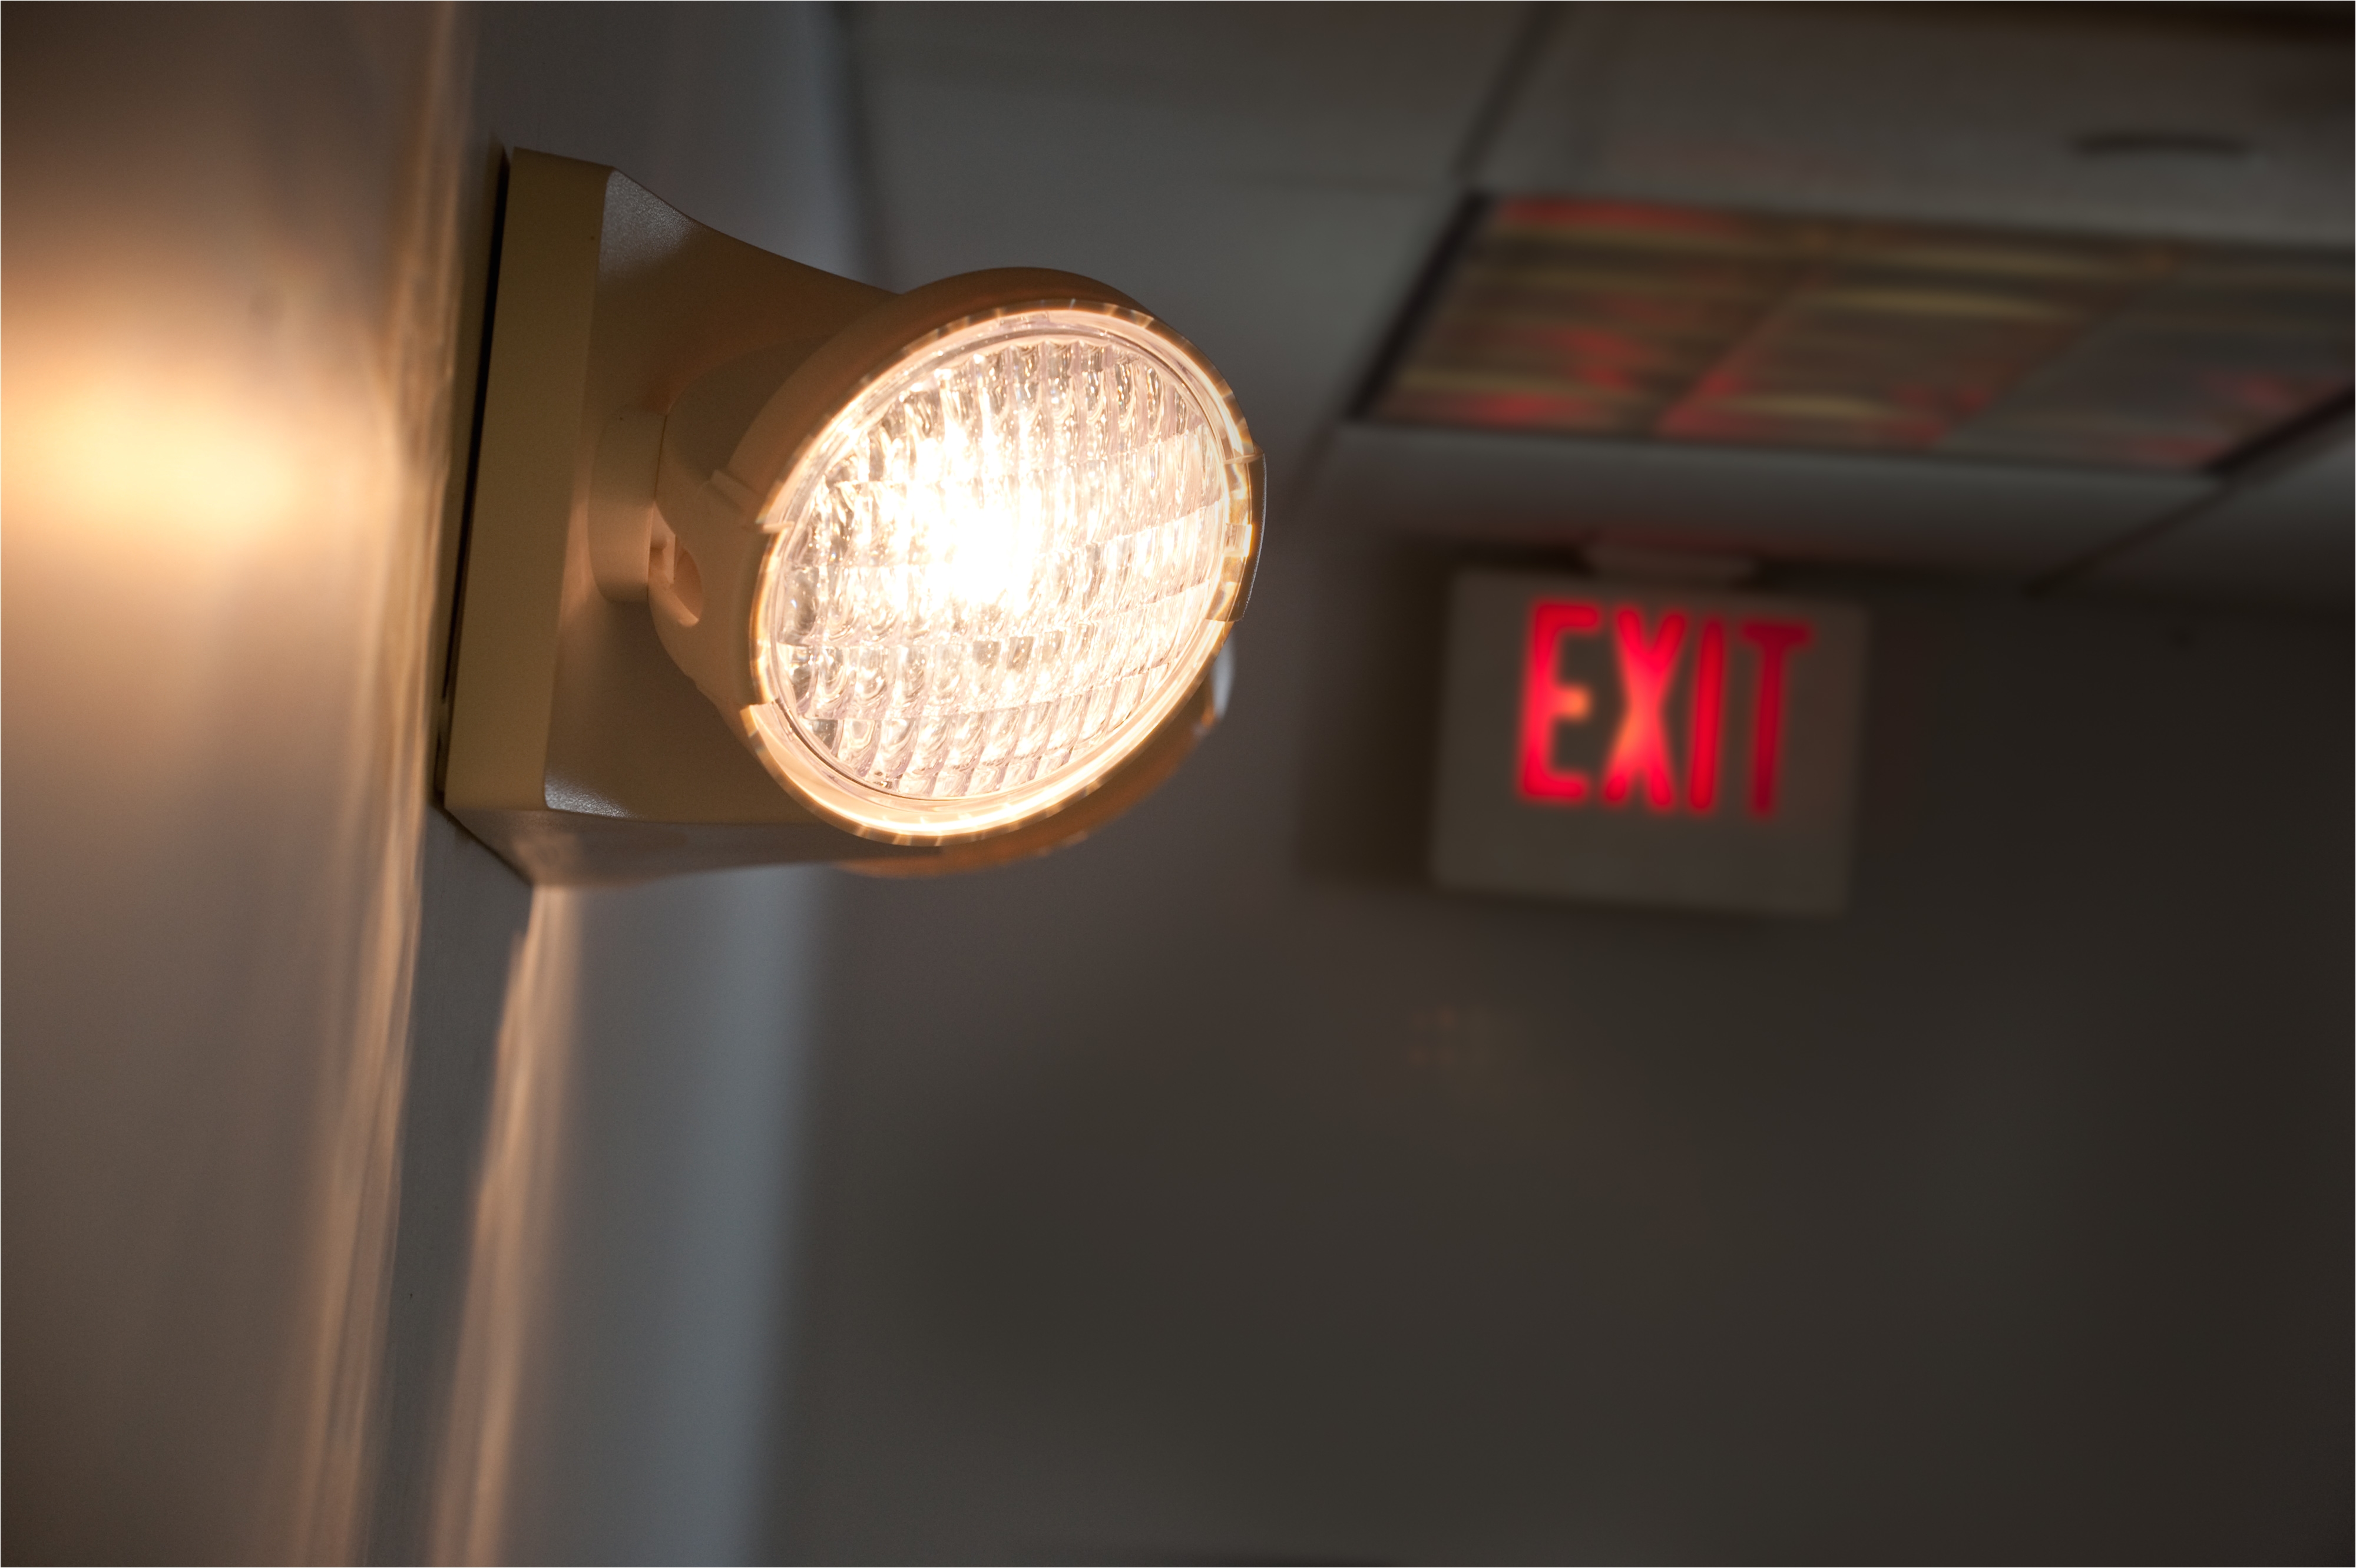 when designing a buildings emergency egress system businesses and building managers must consider illuminated exit signs emergency lighting and lighting